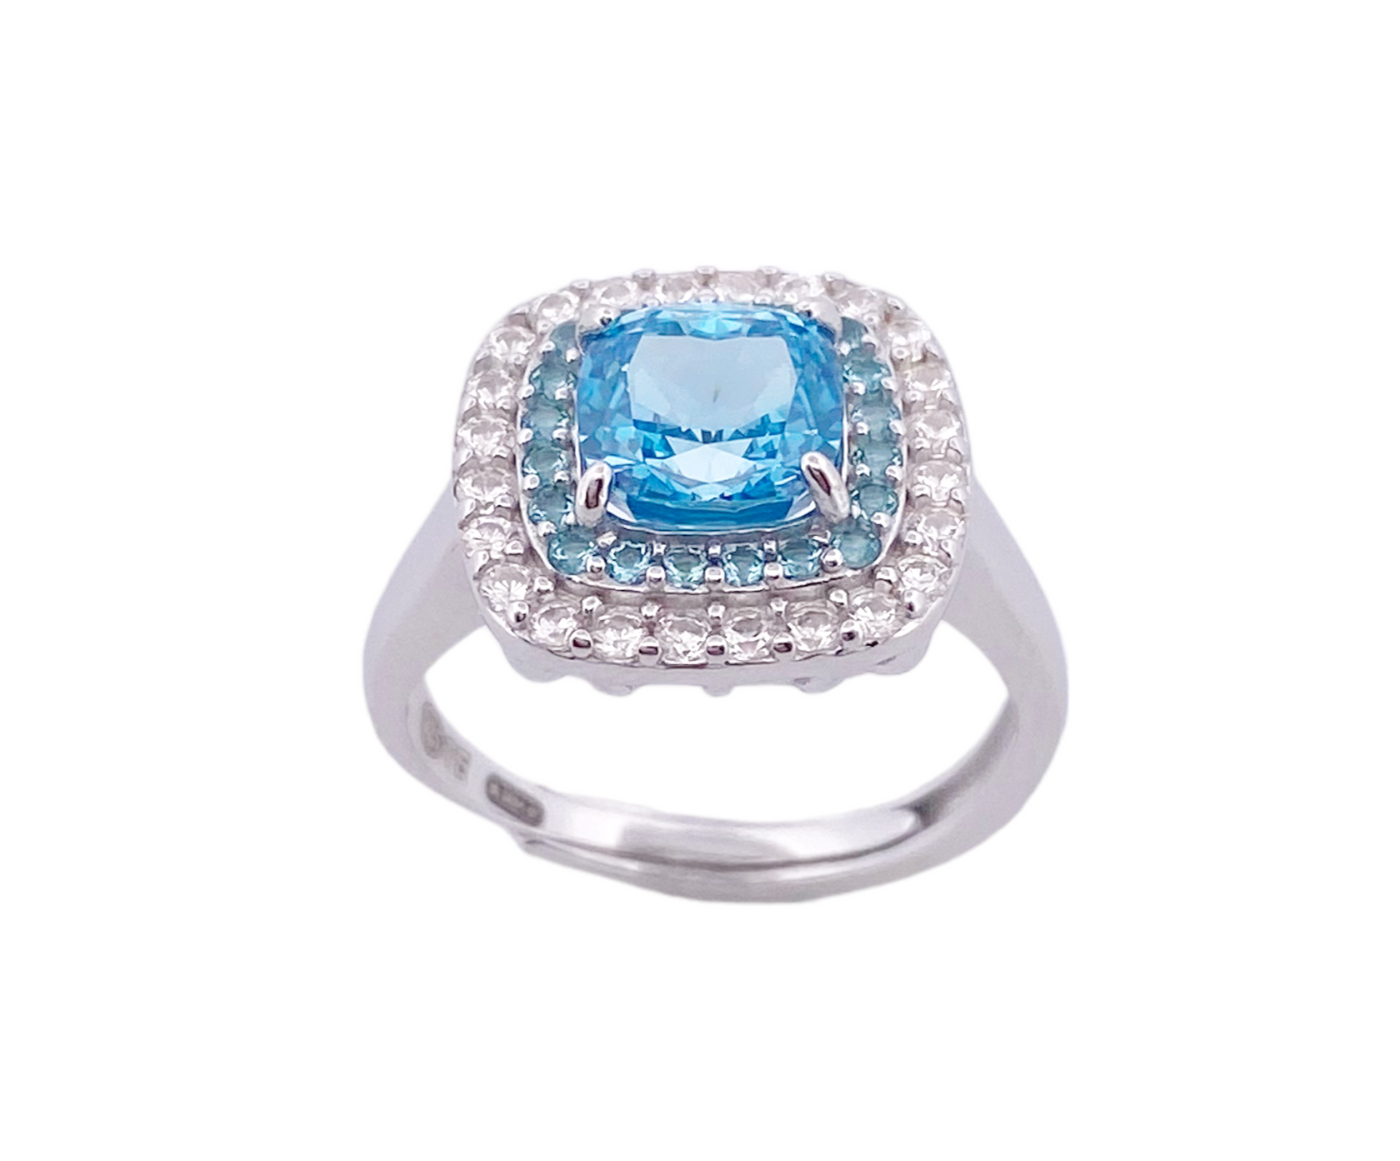 Silver ring with a central cushion diamond replica stone